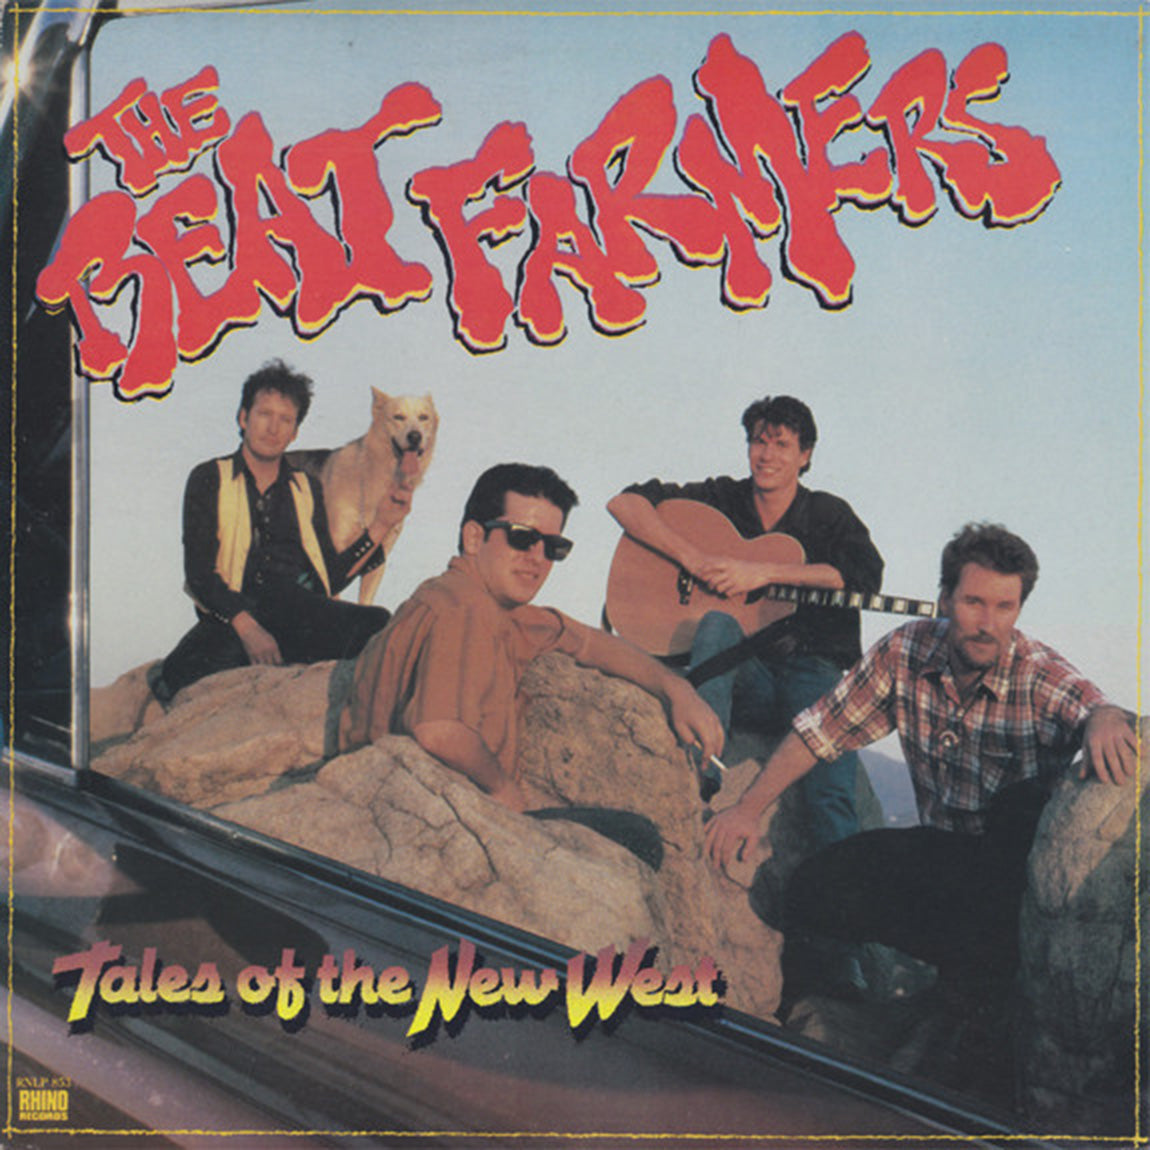 The Beat Farmers – Tales Of The New West - 1985